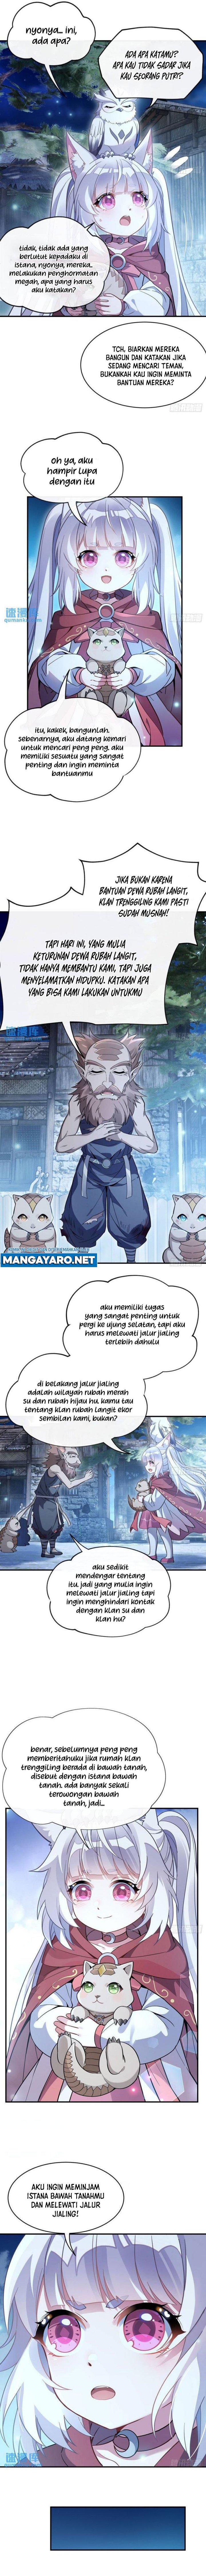 Dilarang COPAS - situs resmi www.mangacanblog.com - Komik my female apprentices are all big shots from the future 193 - chapter 193 194 Indonesia my female apprentices are all big shots from the future 193 - chapter 193 Terbaru 7|Baca Manga Komik Indonesia|Mangacan